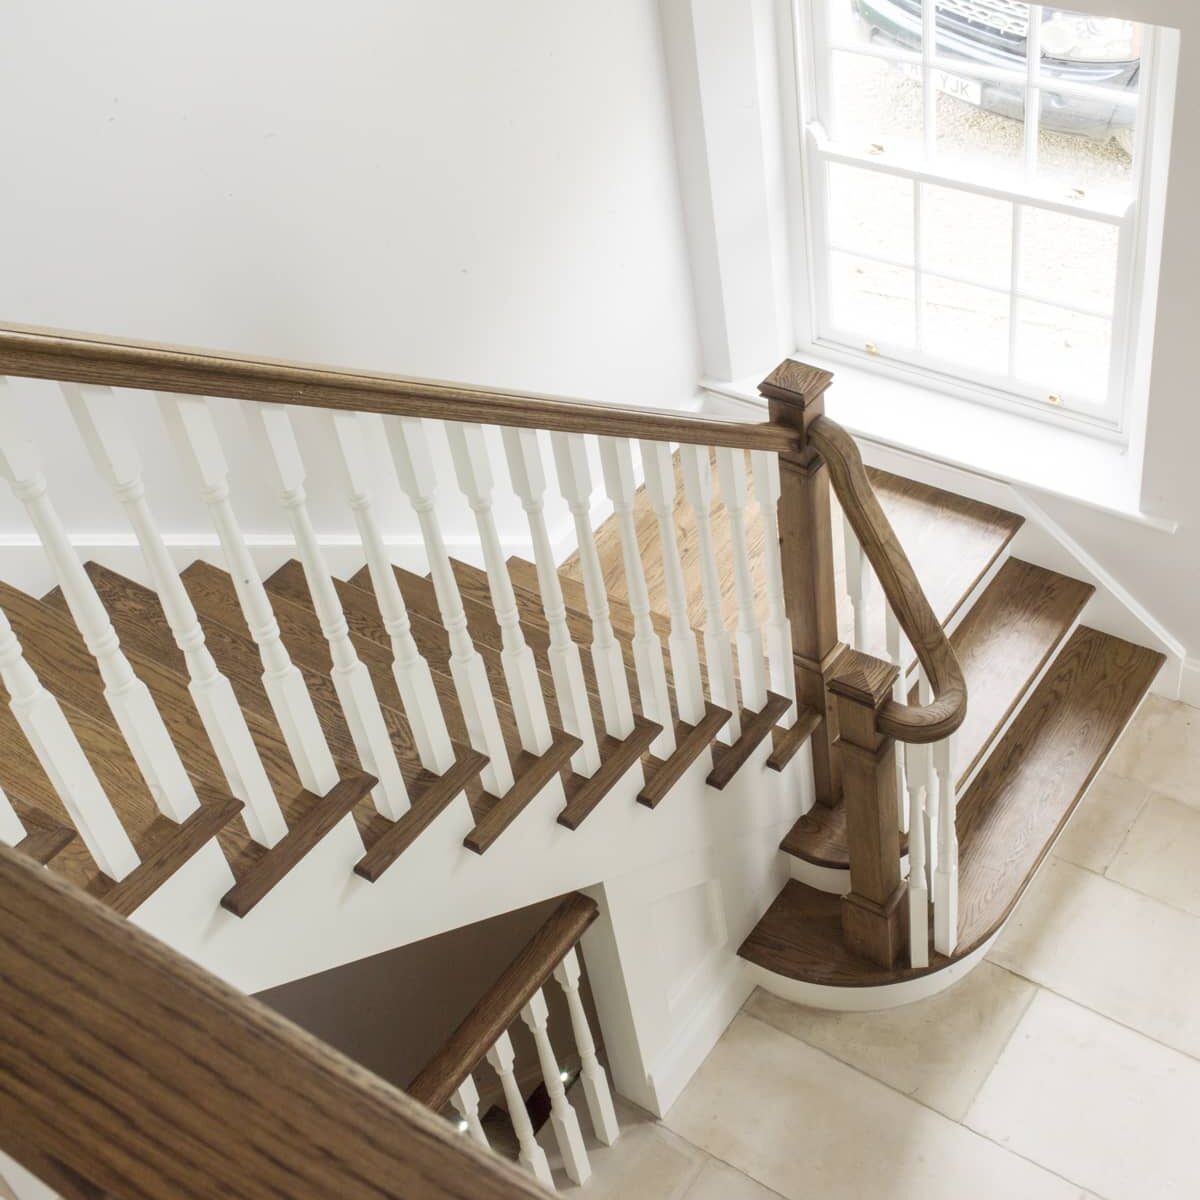 Curved oak staircase with banisters